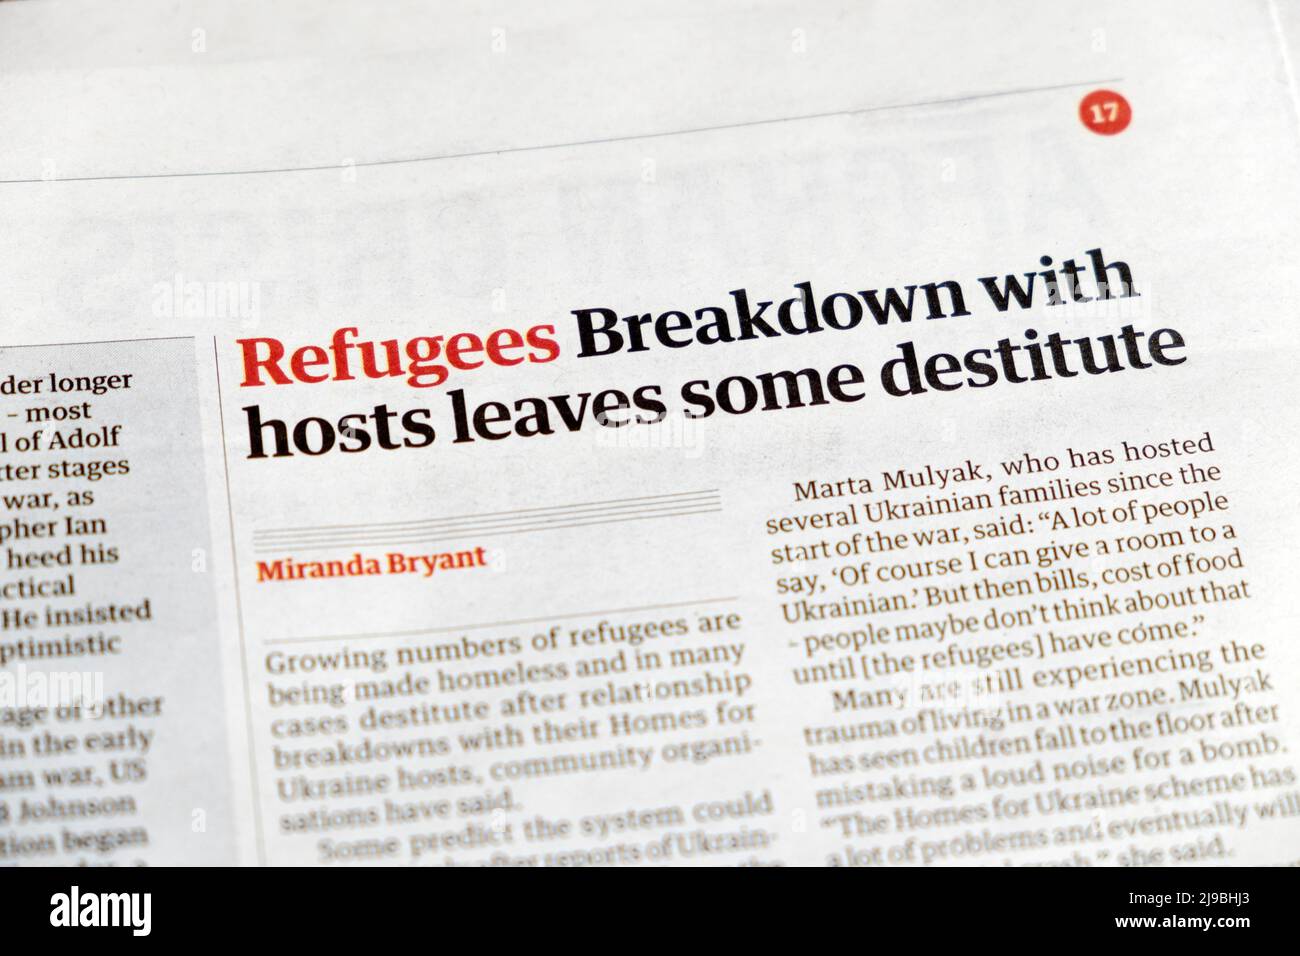 Homes for Ukraine 'Refugees Breakdown with hosts leaves some destitute' Guardian newspaper headline clipping 18 May 2022 London UK Stock Photo